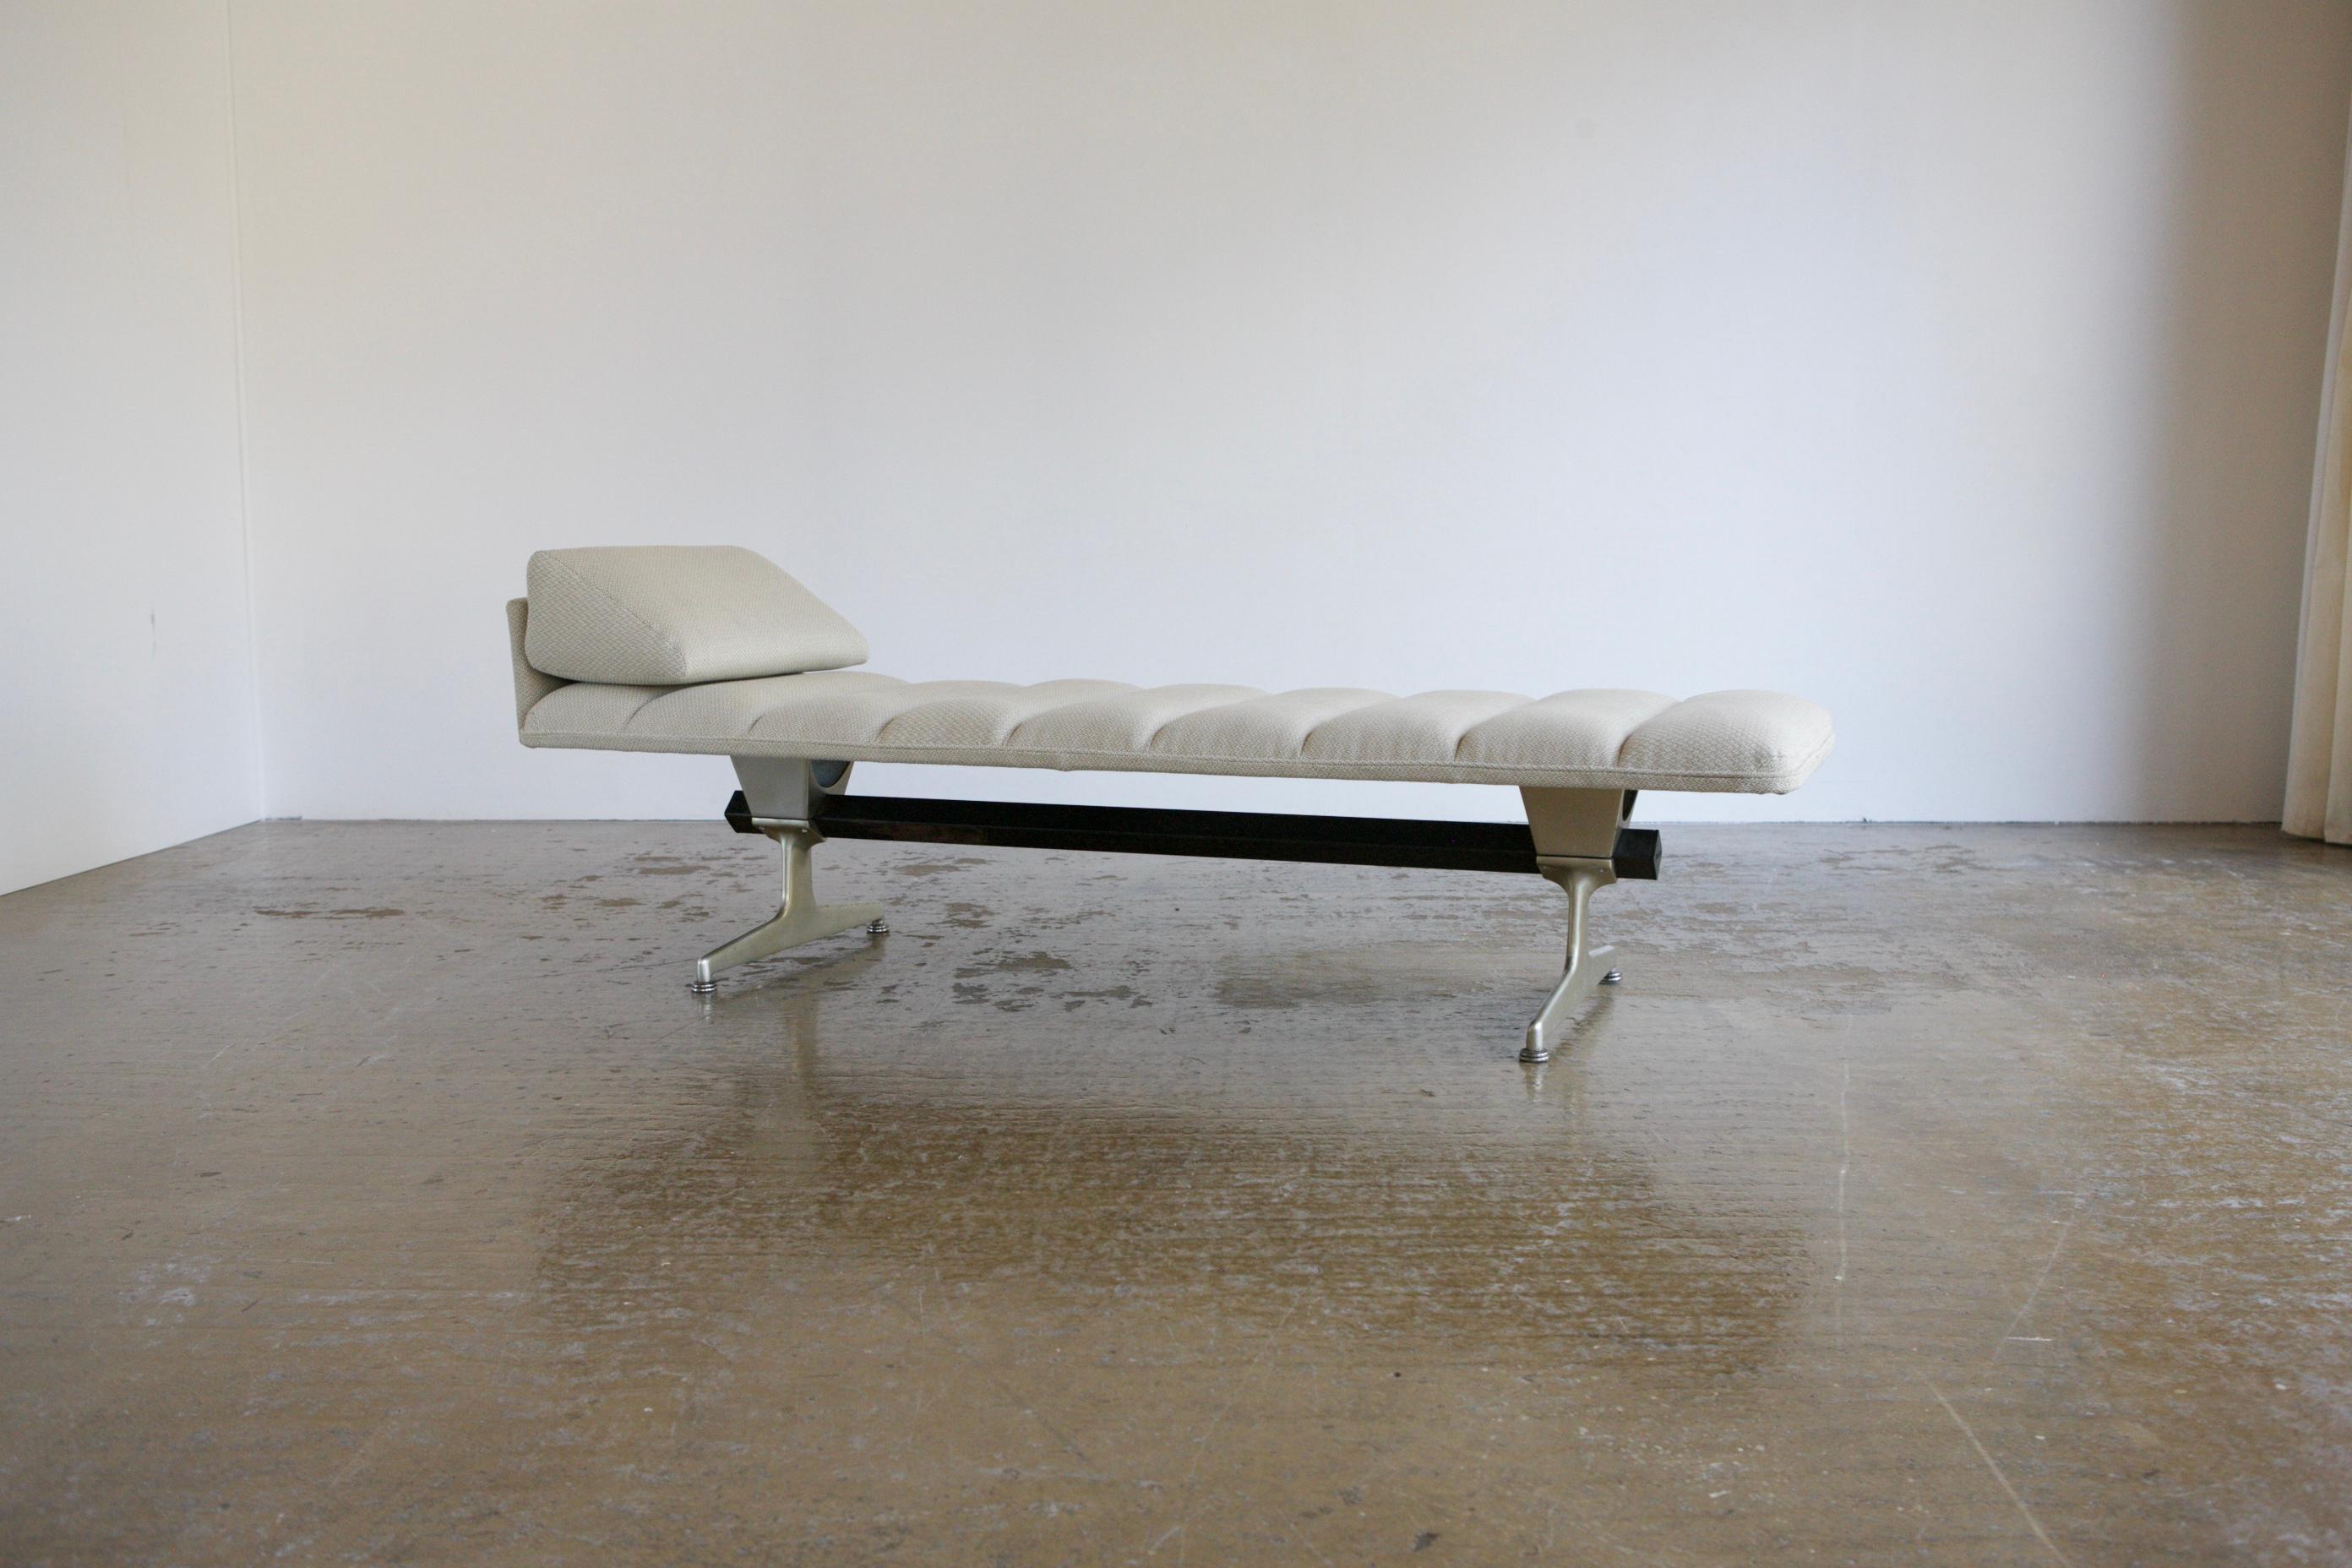 This 1970's bench has a cushioned seat and a custom head rest. The bench was manufactured by Artifort and desiged by Geoffrey D Hartcourt. He started designing for Artifort in 1962 and went on to design many lines for many years. Always keeping the